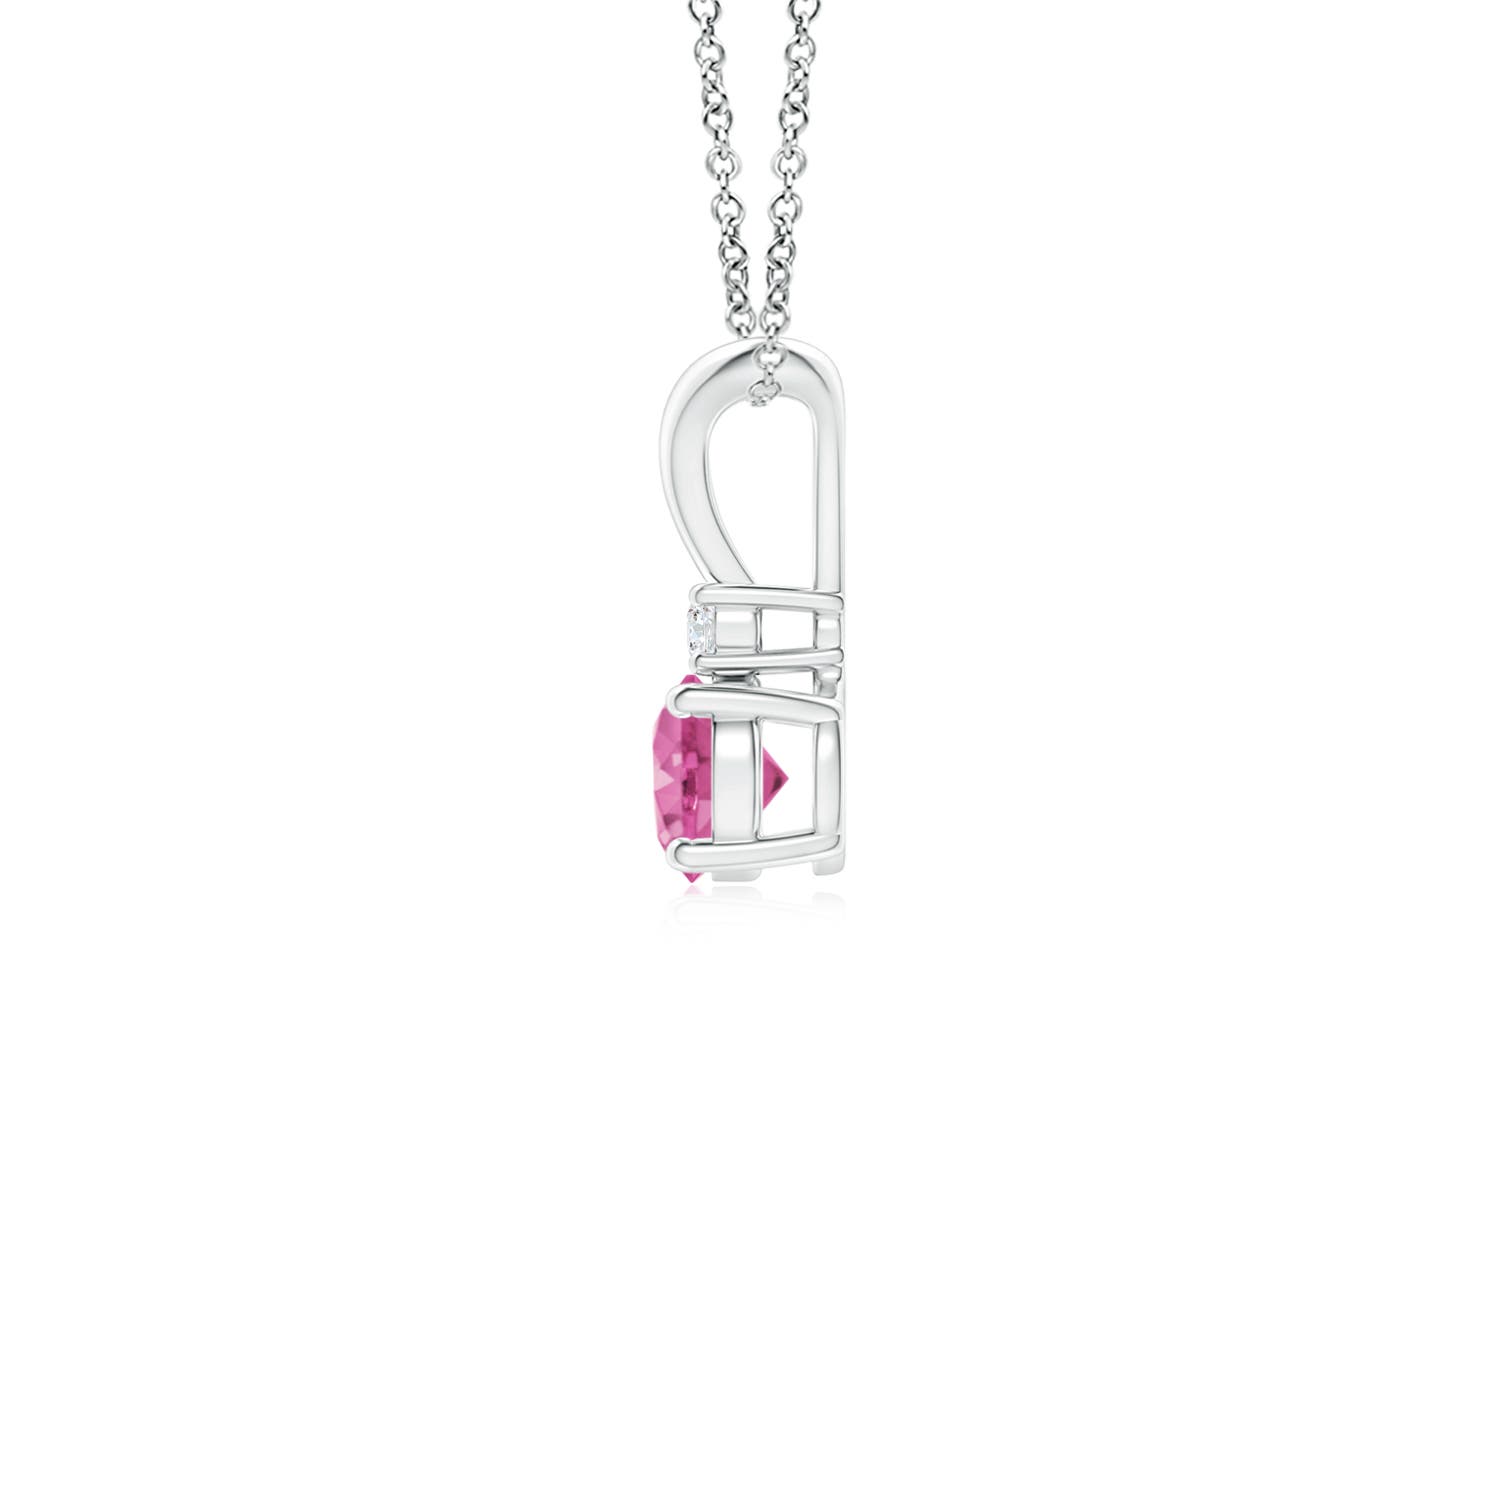 AAA - Pink Sapphire / 0.34 CT / 14 KT White Gold